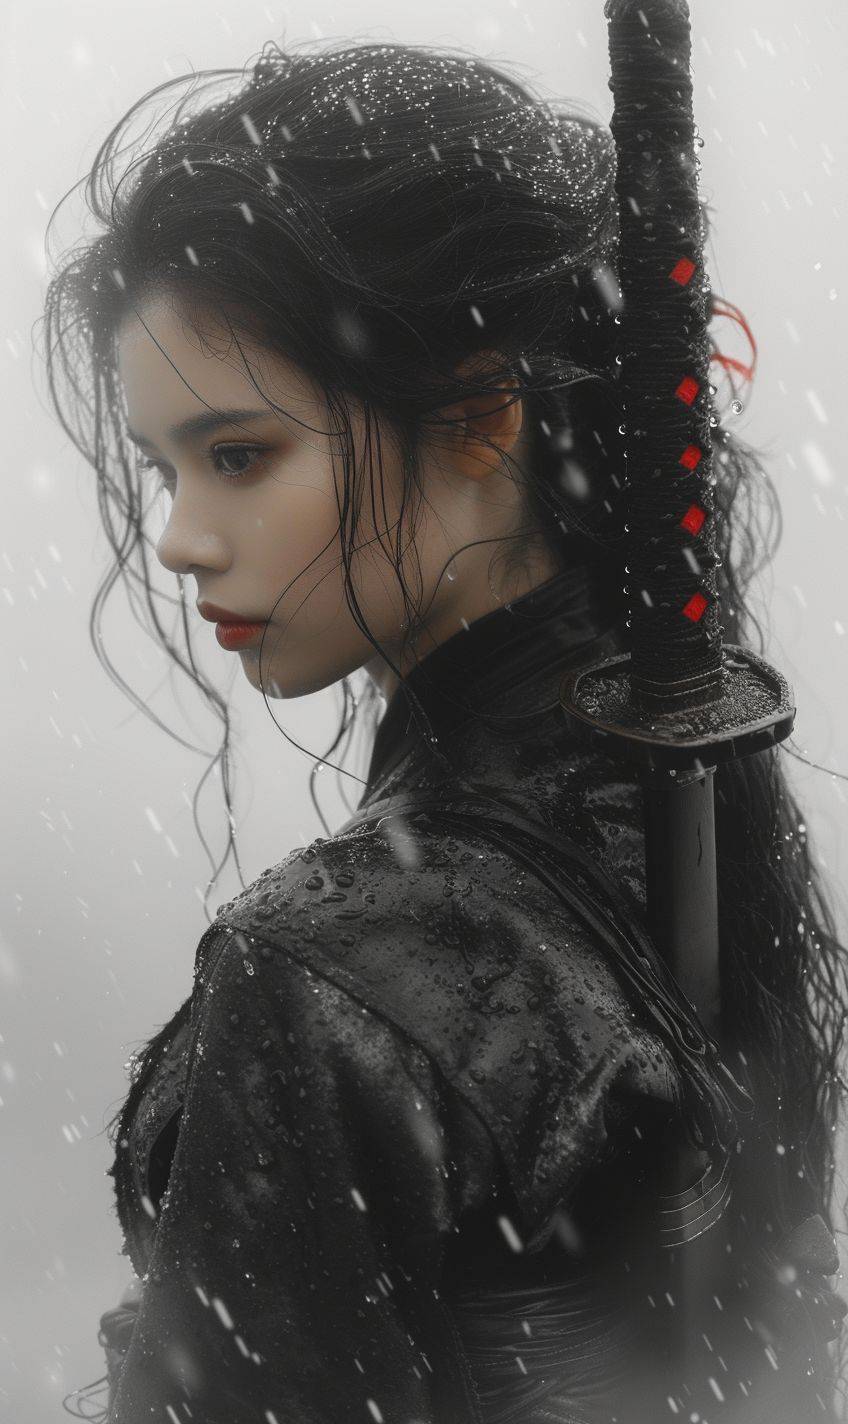 Samurai girl in the style of black and white realism, atmospheric impressionism, darkly romantic realism, pre-raphaelite realism, grainy black and white photos, soft-focused realism